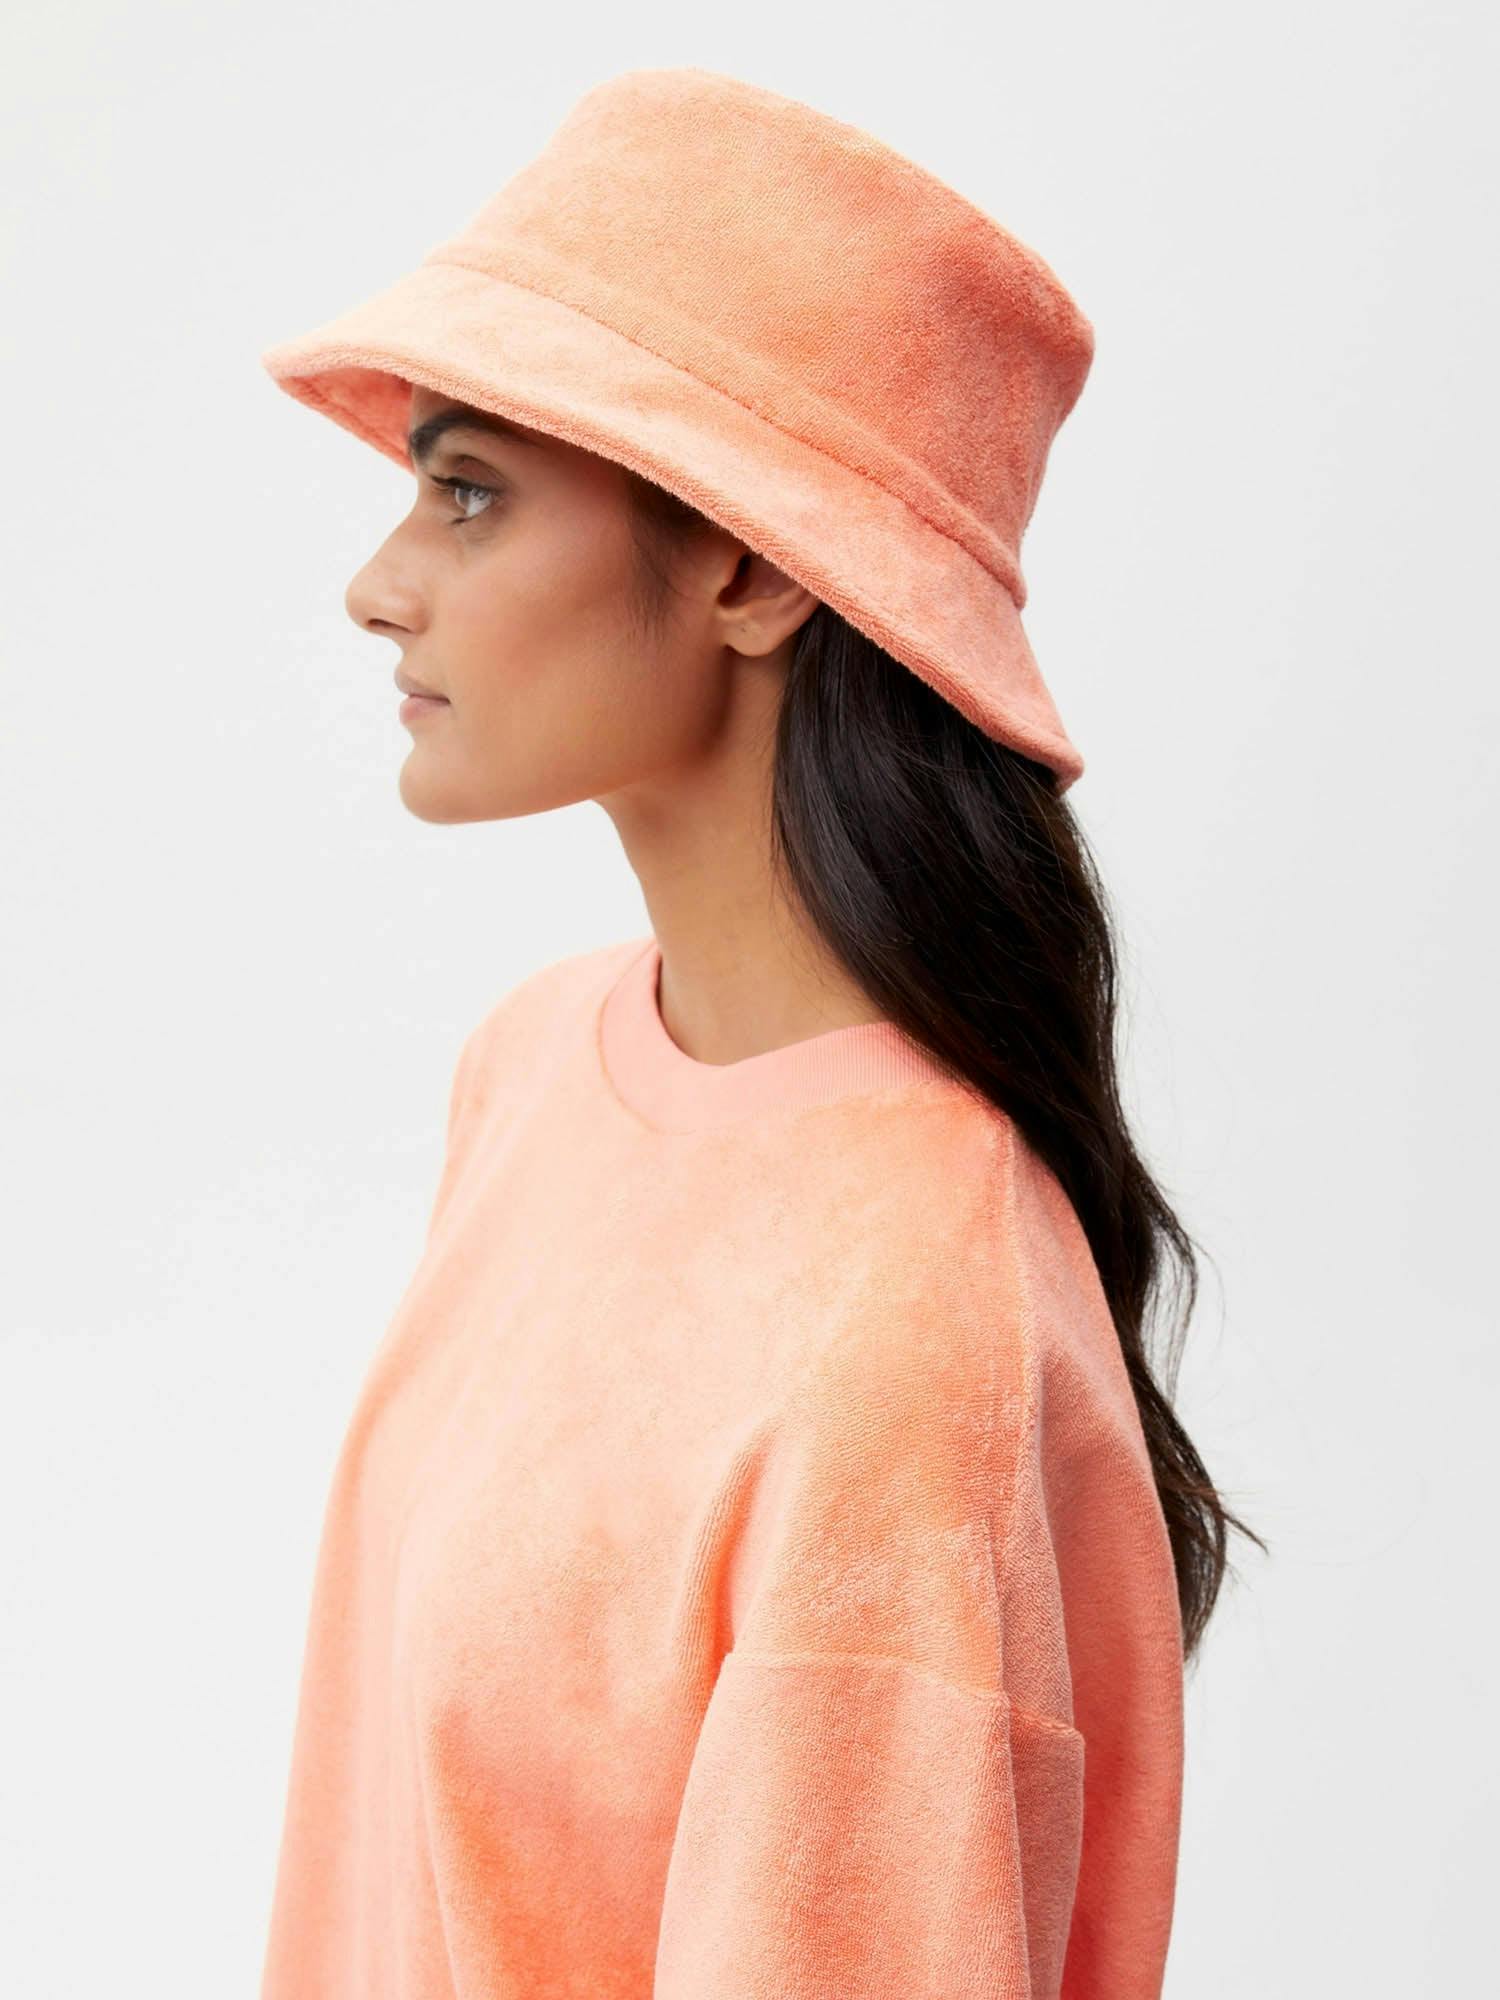 https://cdn.shopify.com/s/files/1/0035/1309/0115/products/Towelling-Bucket-Hat-Peach-Perfect-Female-1.jpg?v=1662476480